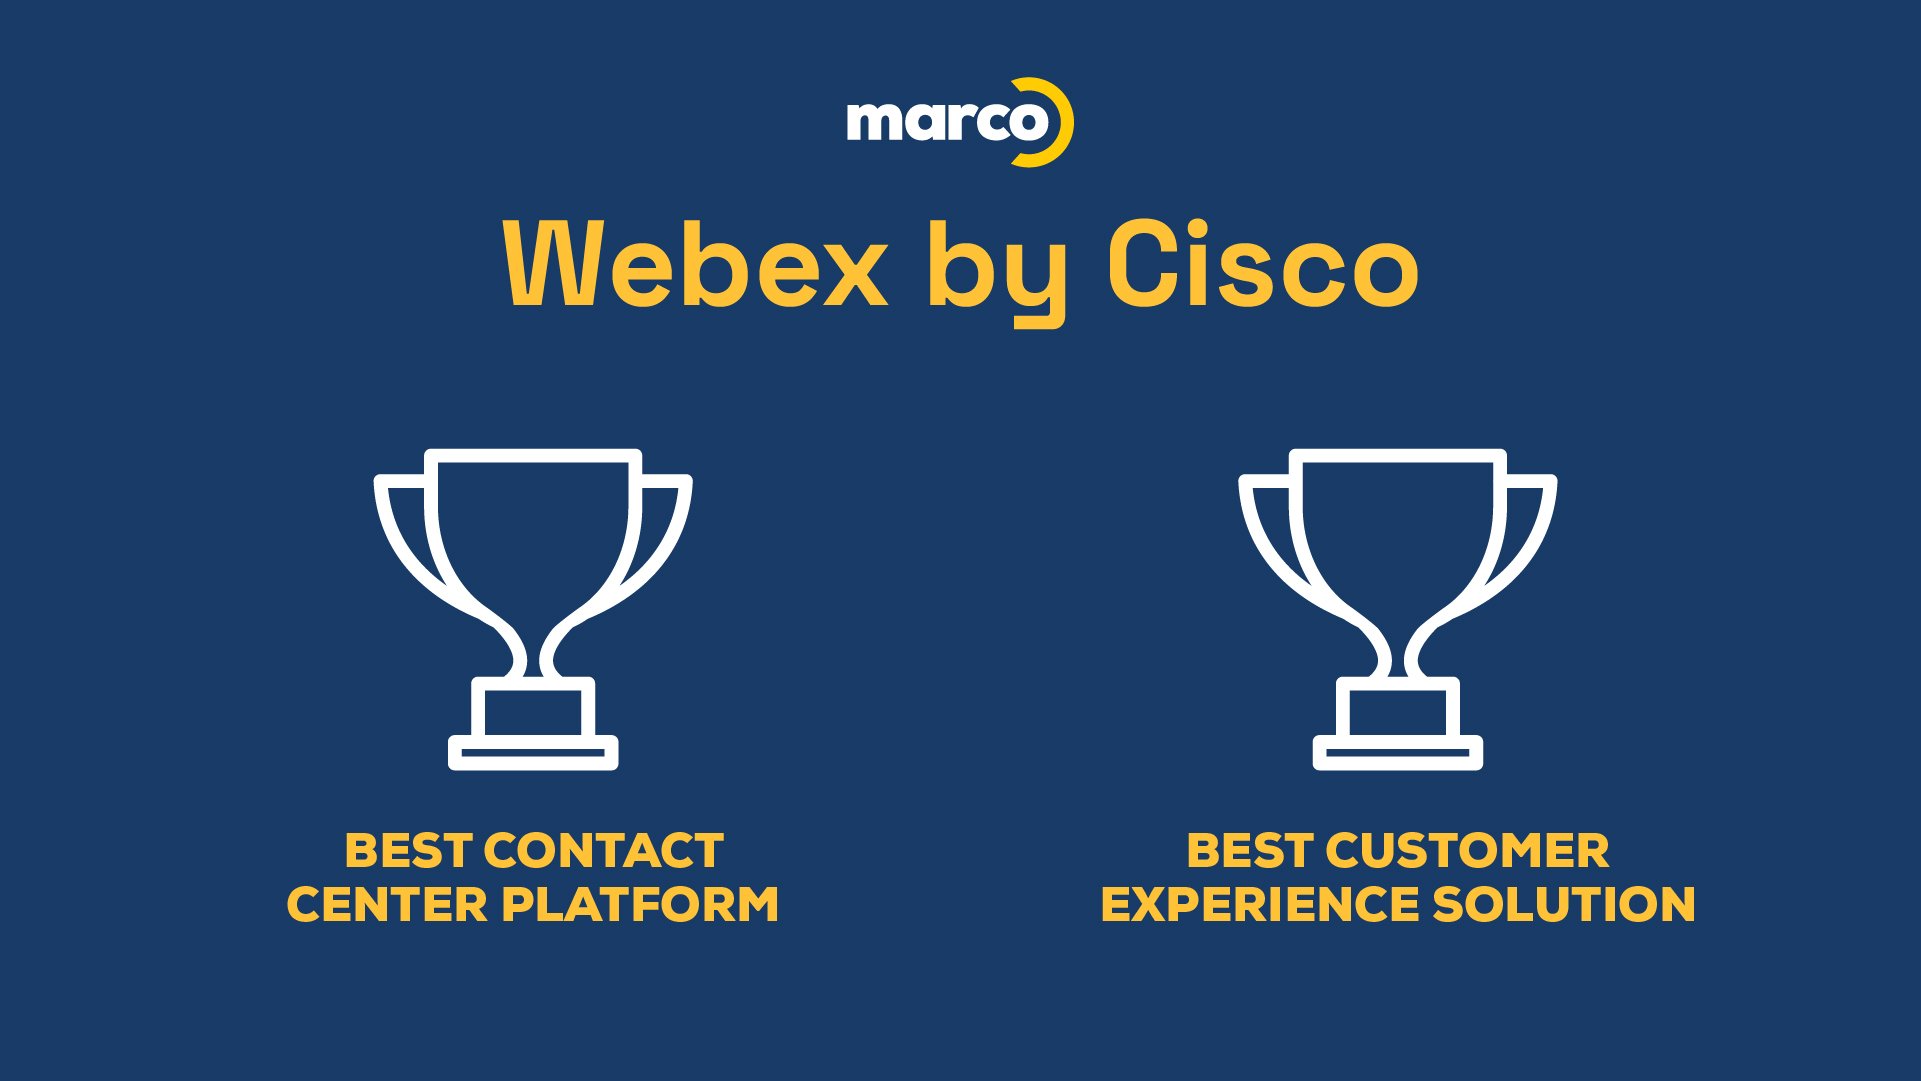 Webex by Cisco trophies